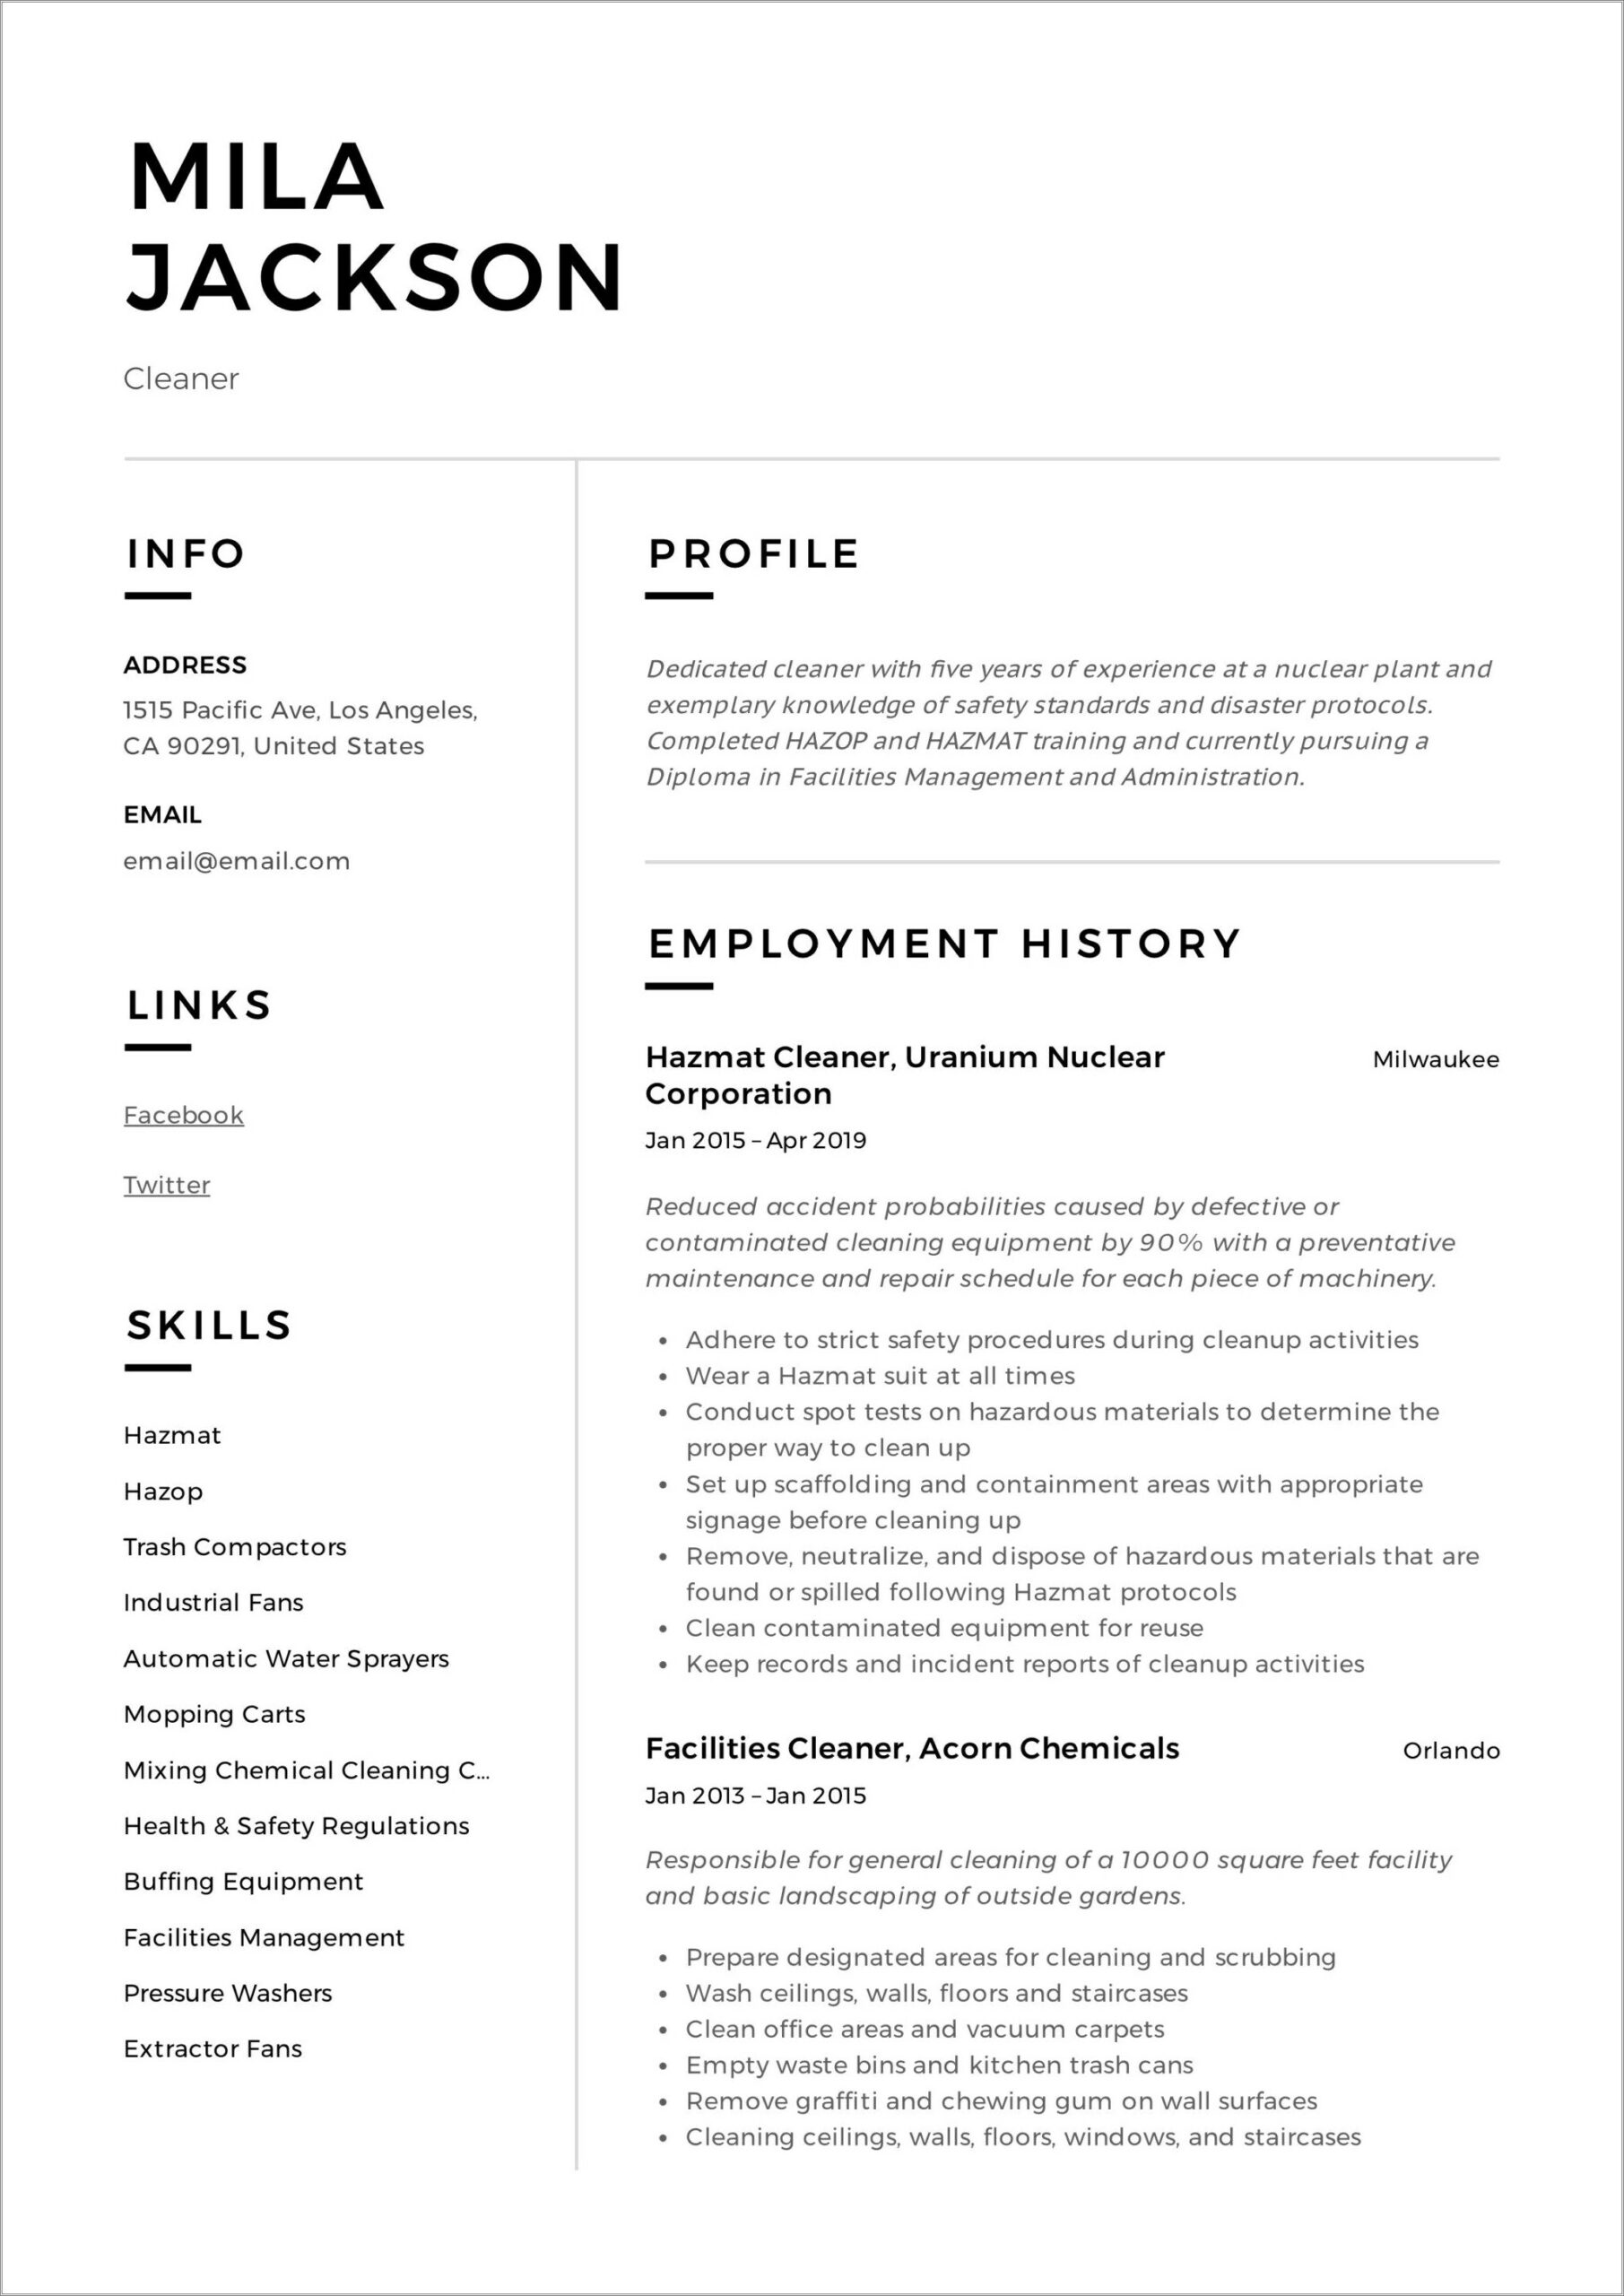 Cleaning Services Job Description For Resume